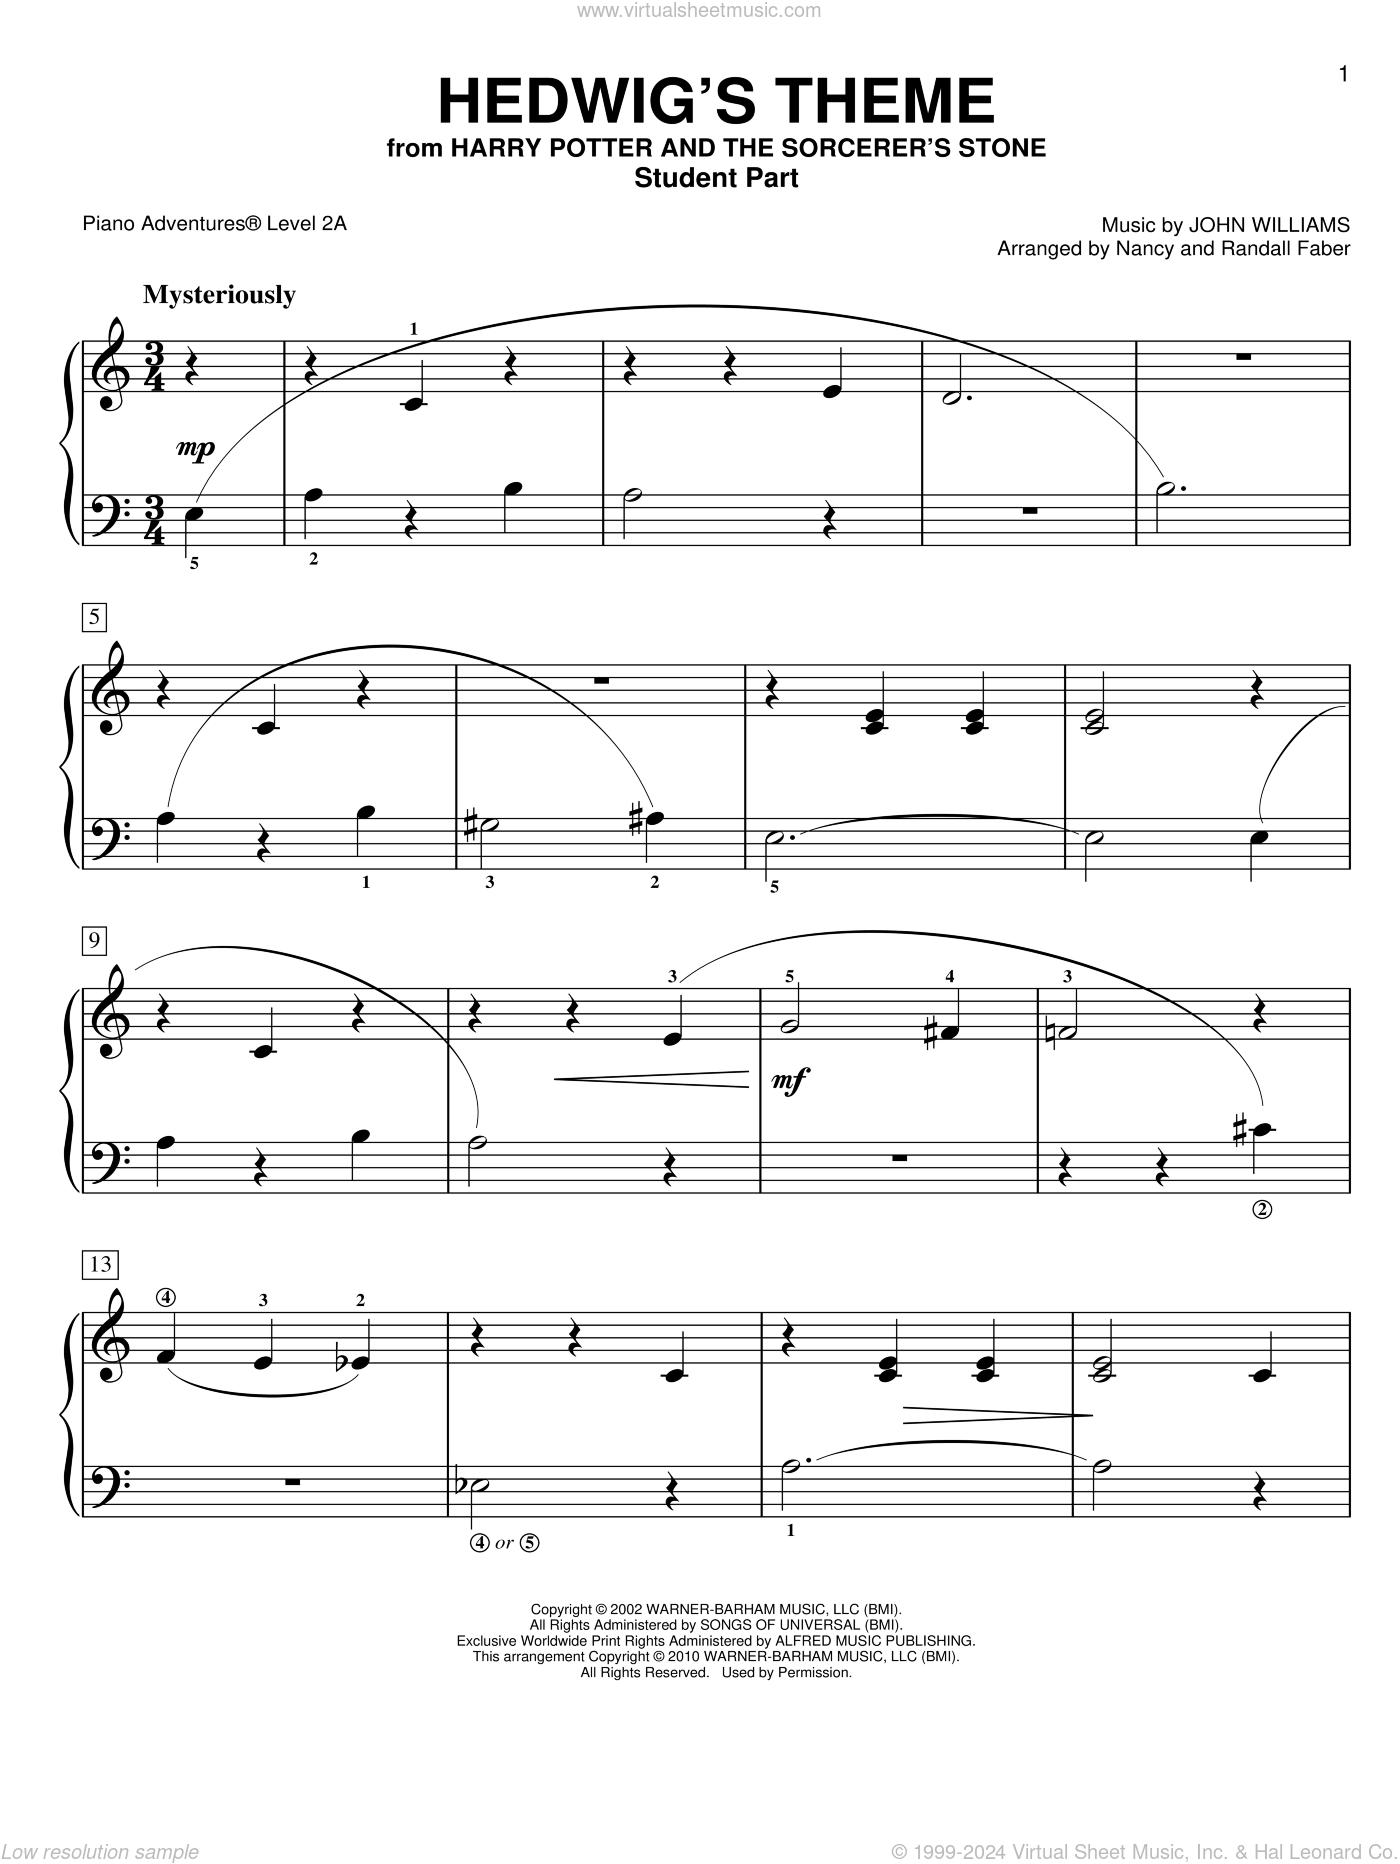 Free sheet music preview of Hedwig's Theme for piano solo by John Will...